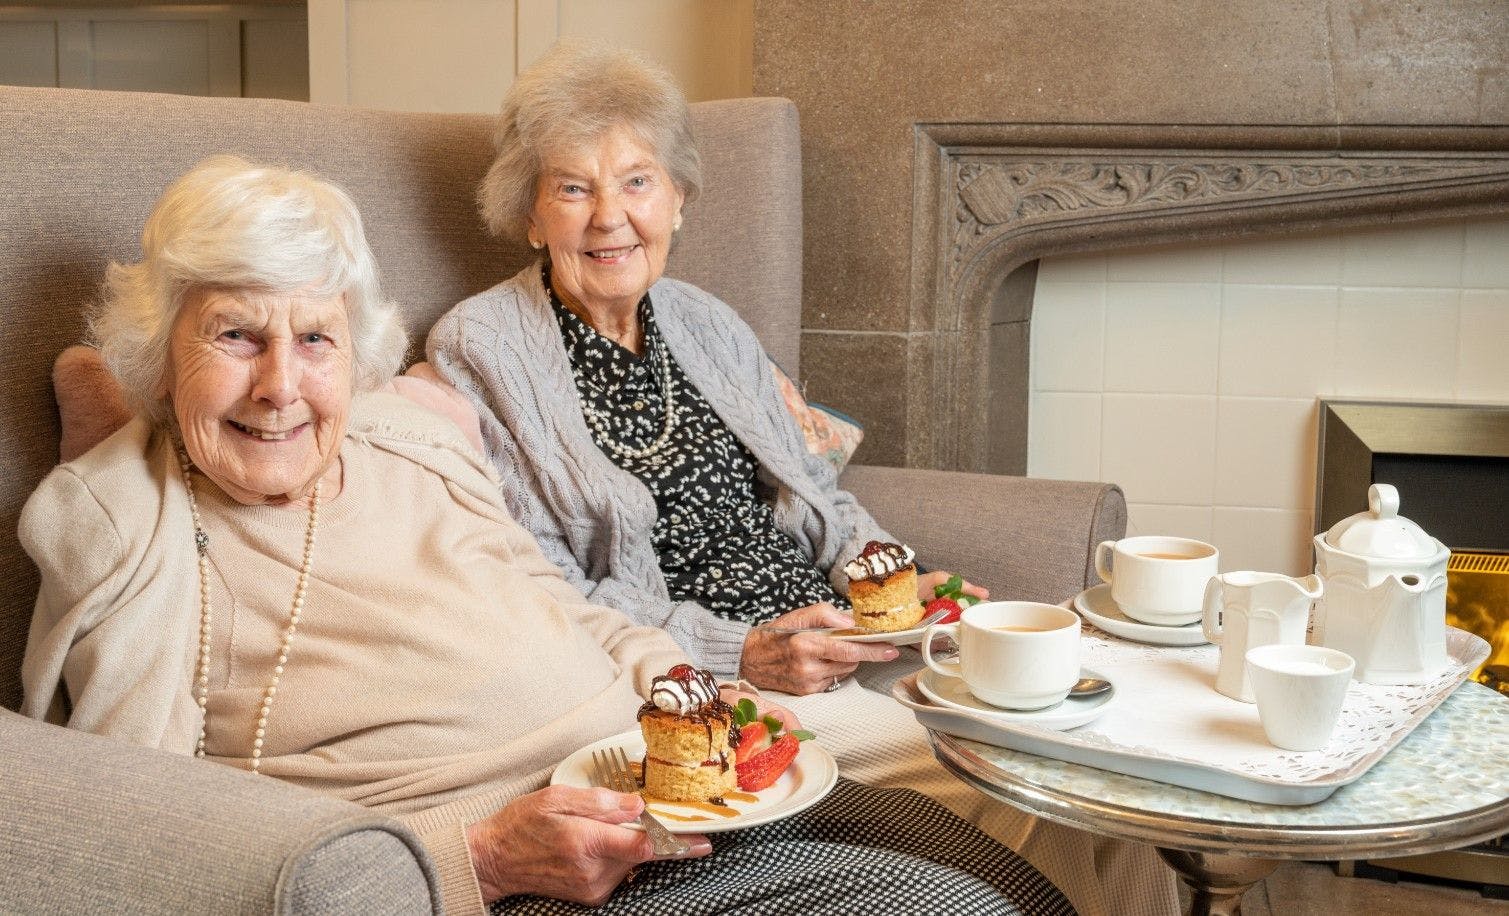 Residents at Walton Manor Care Home in Wakefield, West Yorkshire